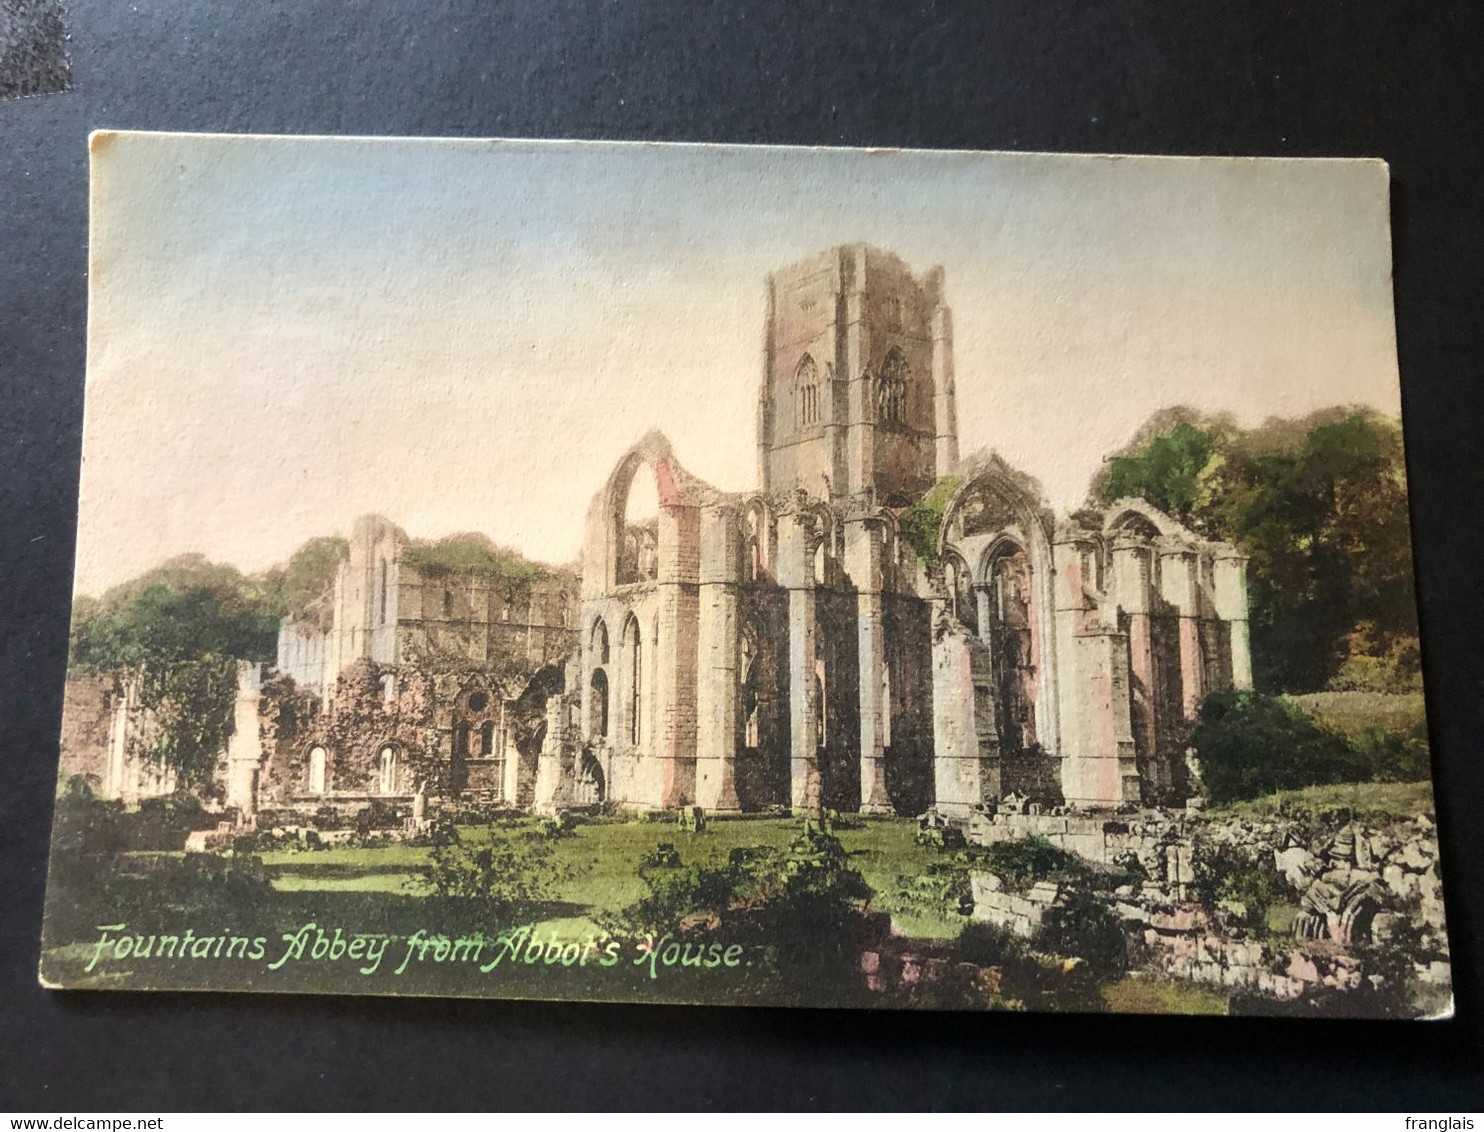 Fountains Abbey From Abbots House, Frith & Co - Whitby